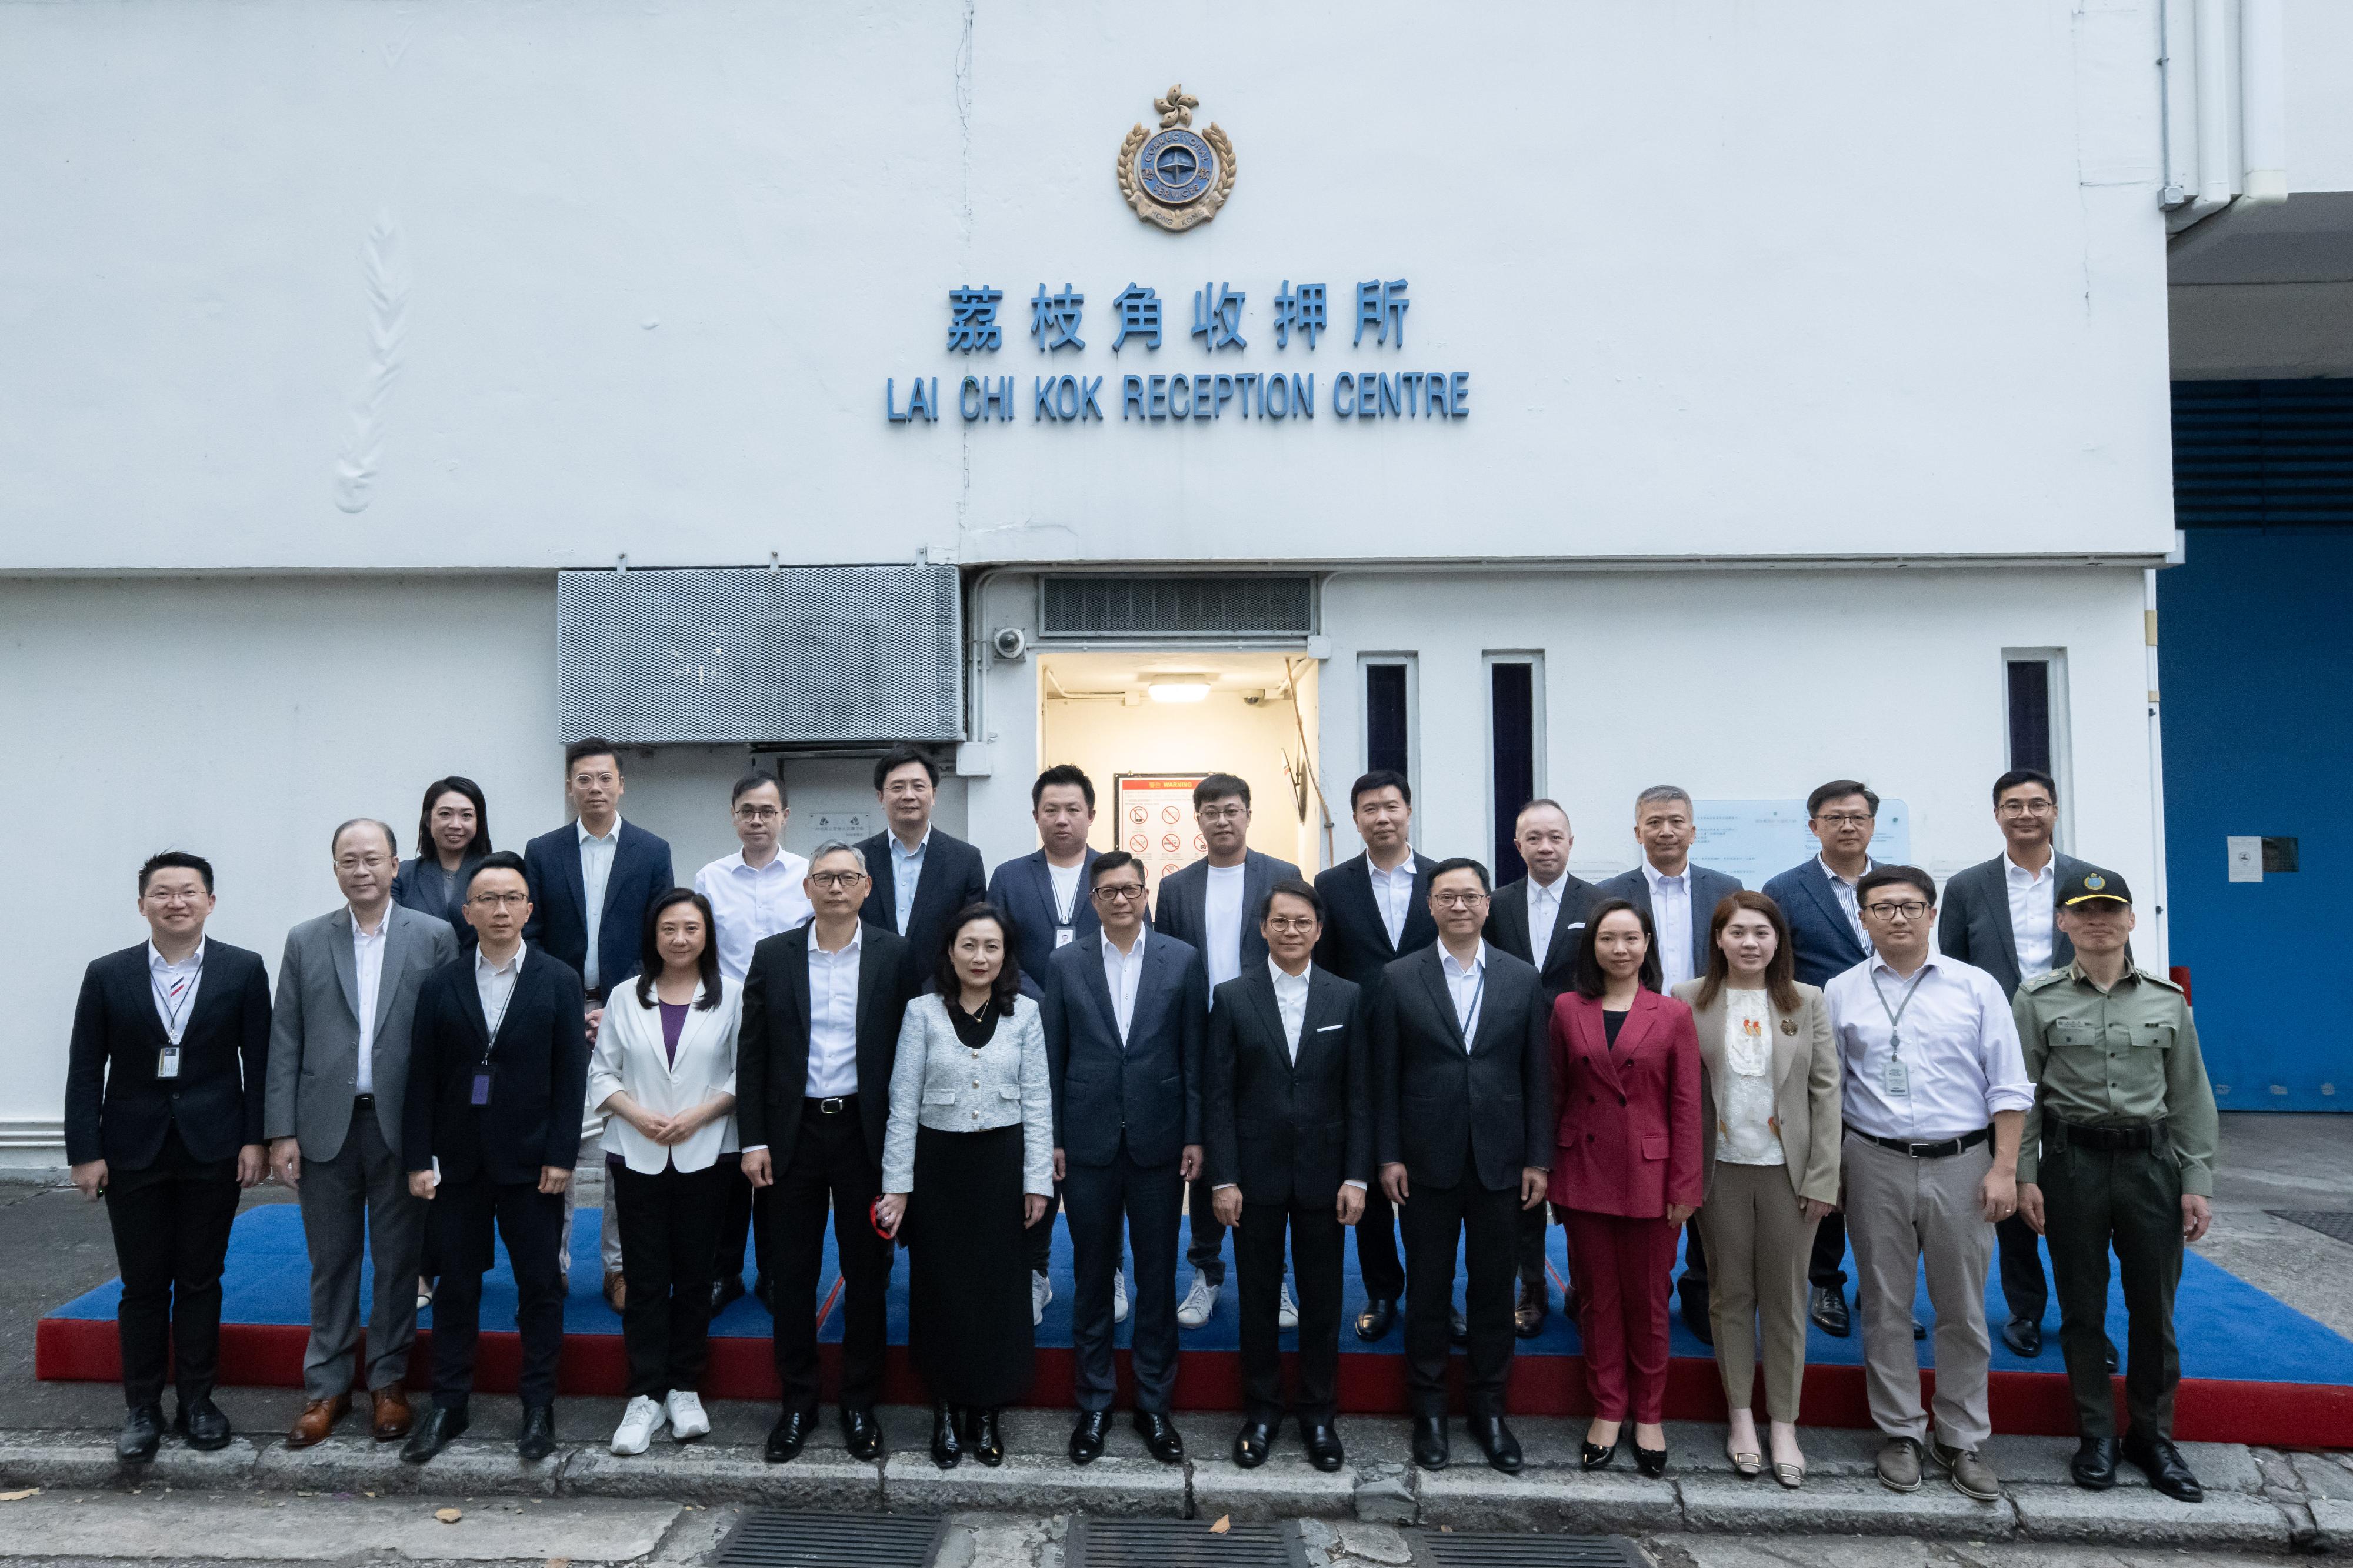 The Legislative Council (LegCo) Panel on Security visited Lai Chi Kok Reception Centre (LCKRC) today (December 12). Photo shows the Chairman of the Panel on Security, Mr Chan Hak-kan (front row, sixth right); the Deputy Chairman of the Panel, Ms Carmen Kan (front row, sixth left), with the Secretary for Security, Mr Tang Ping-keung (front row, seventh right), and the Commissioner of Correctional Services, Mr Wong Kwok-hing (front row, fifth right), and other LegCo Members at LCKRC.